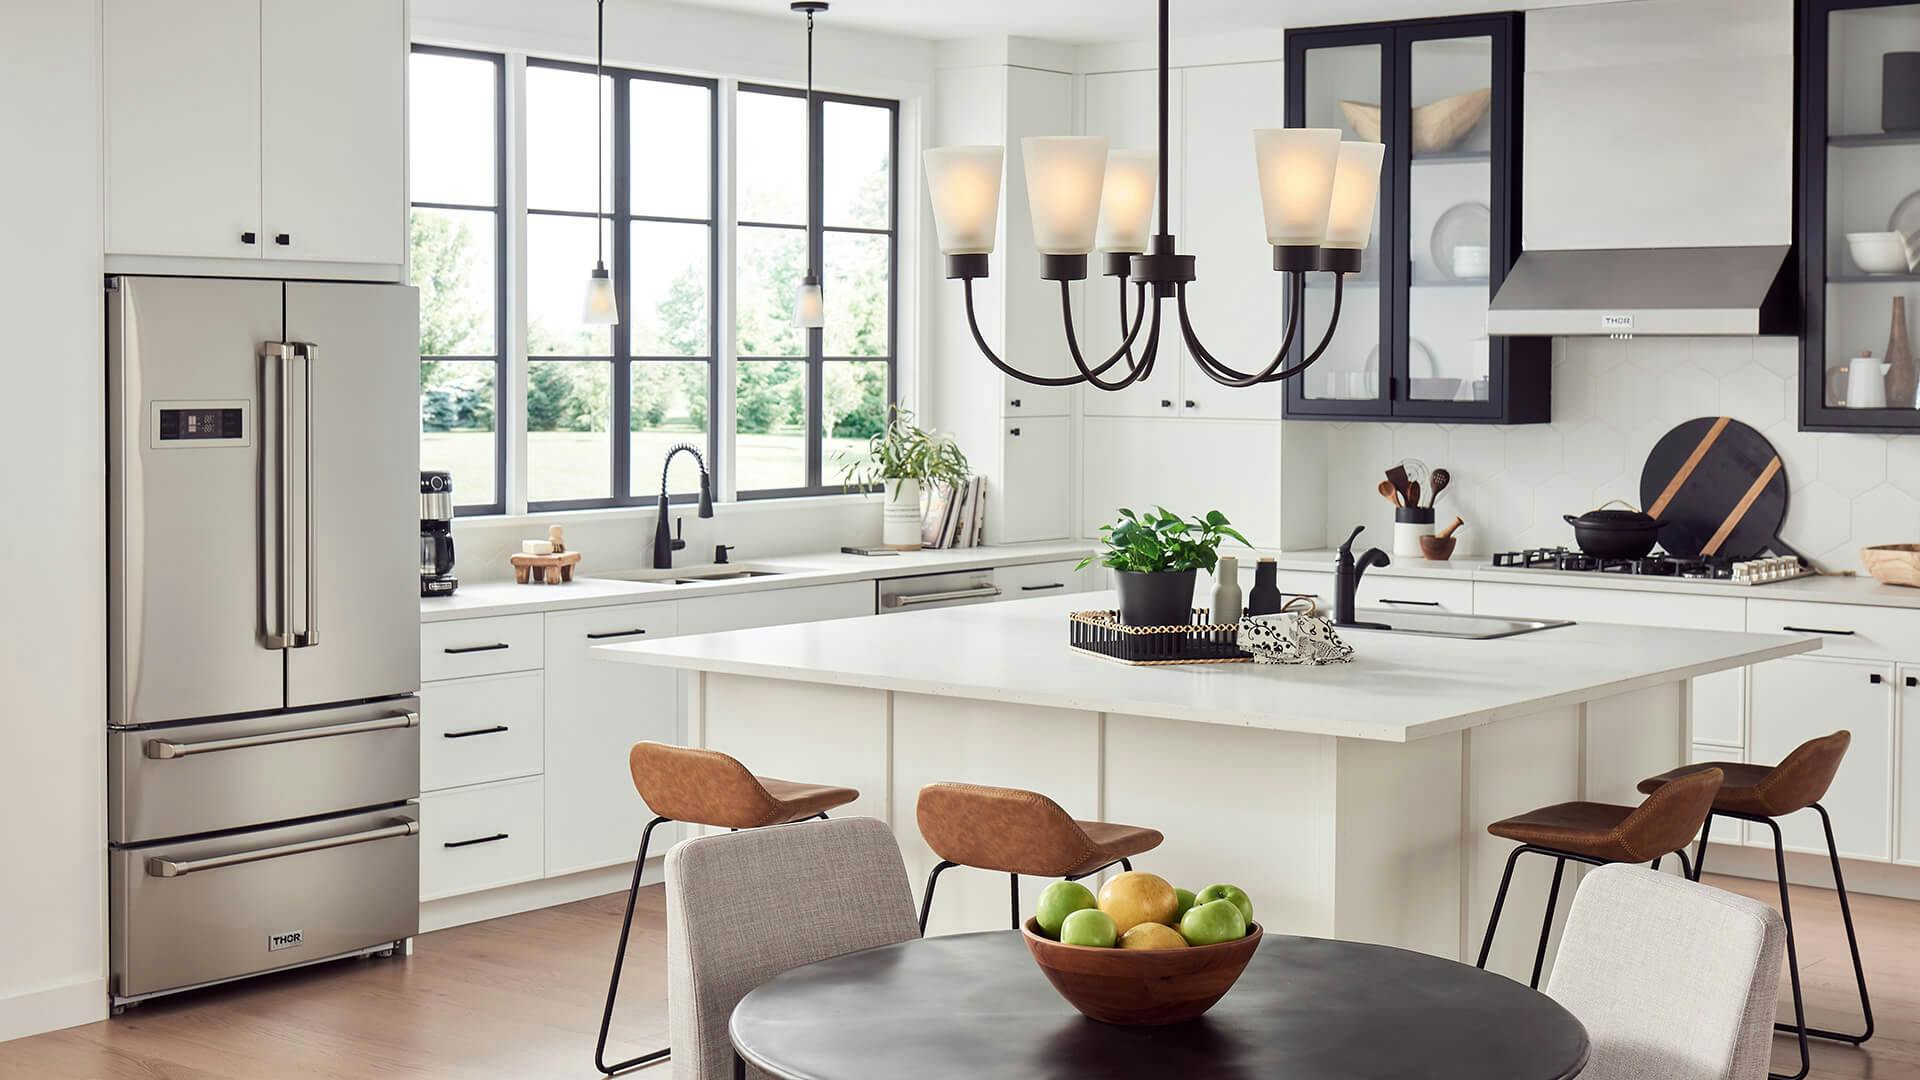 Modern kitchen during the day with large square kitchen island in the center featuring an Erma chandelier in black finish